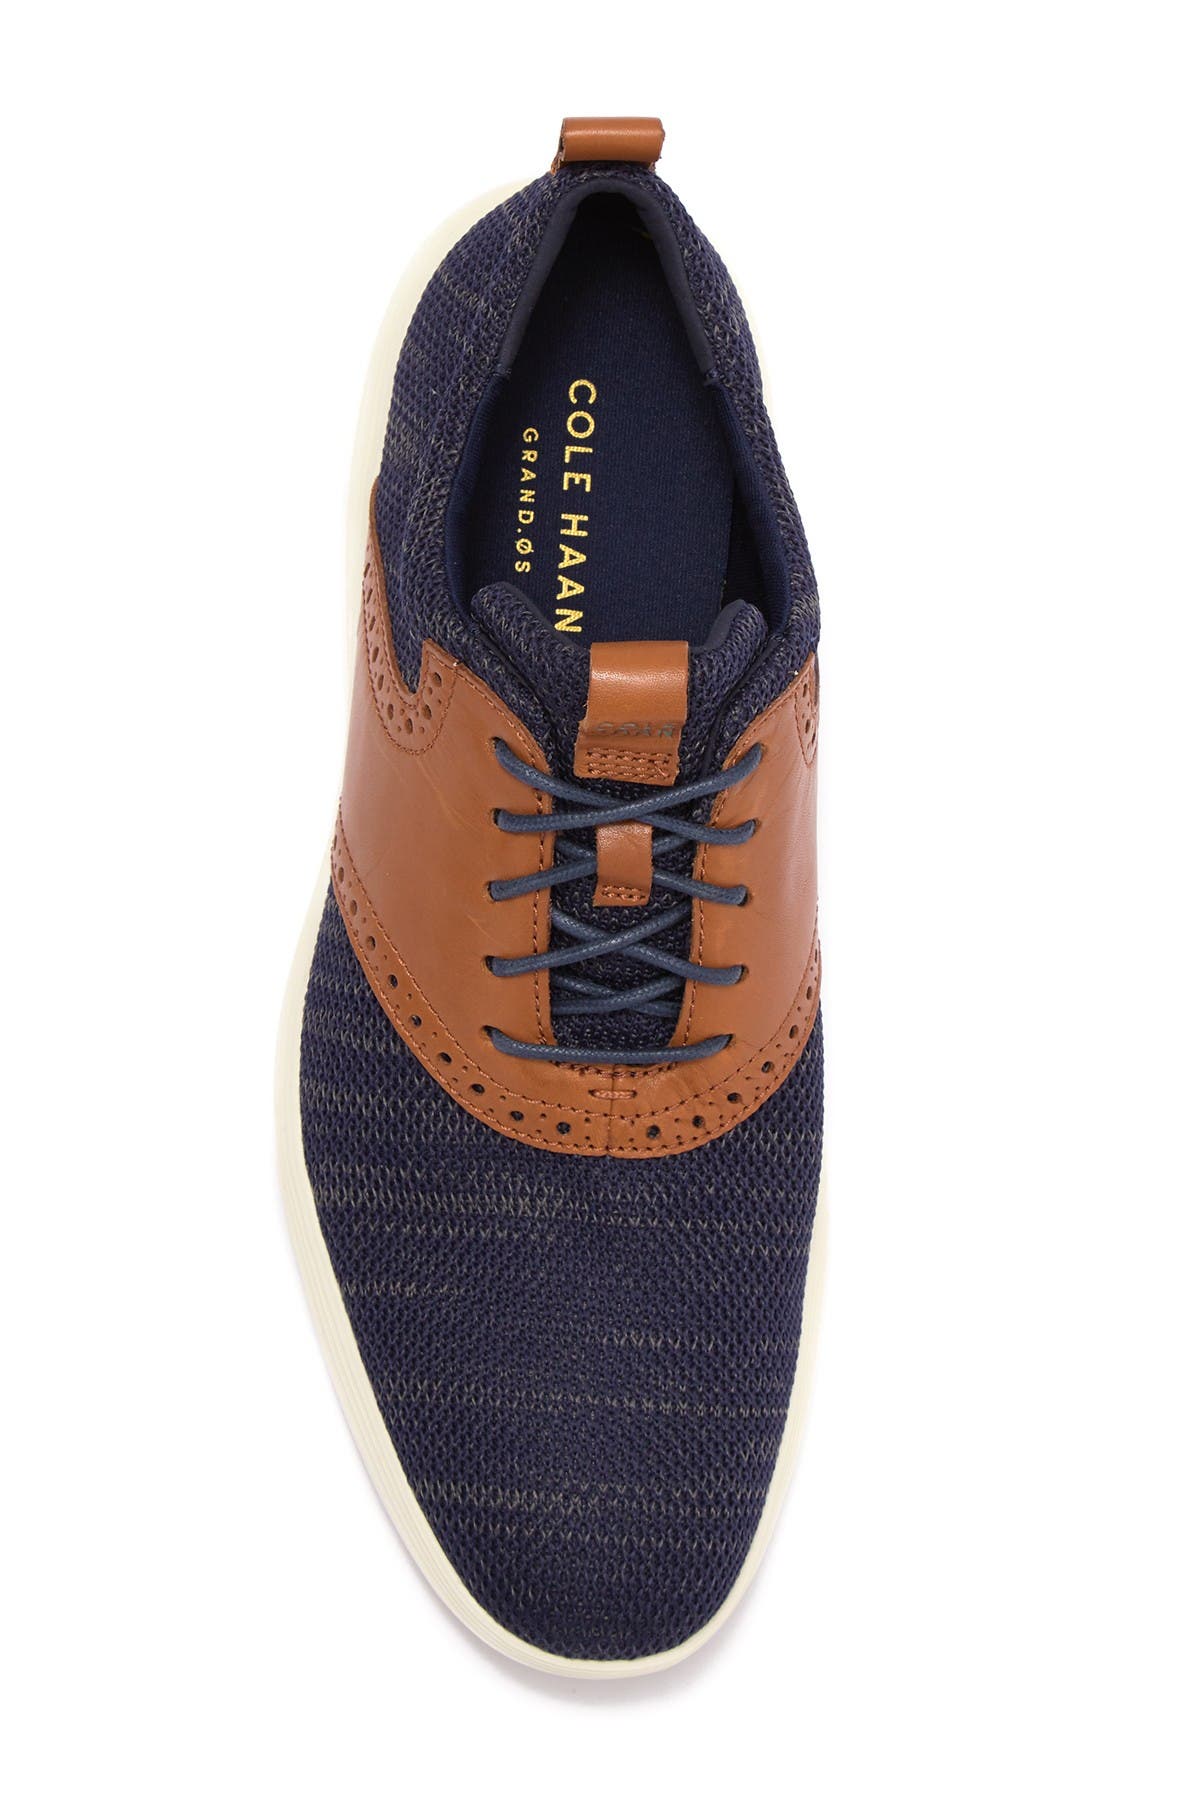 Cole Haan | Grand Tour Knit Oxford | Nordstrom Rack